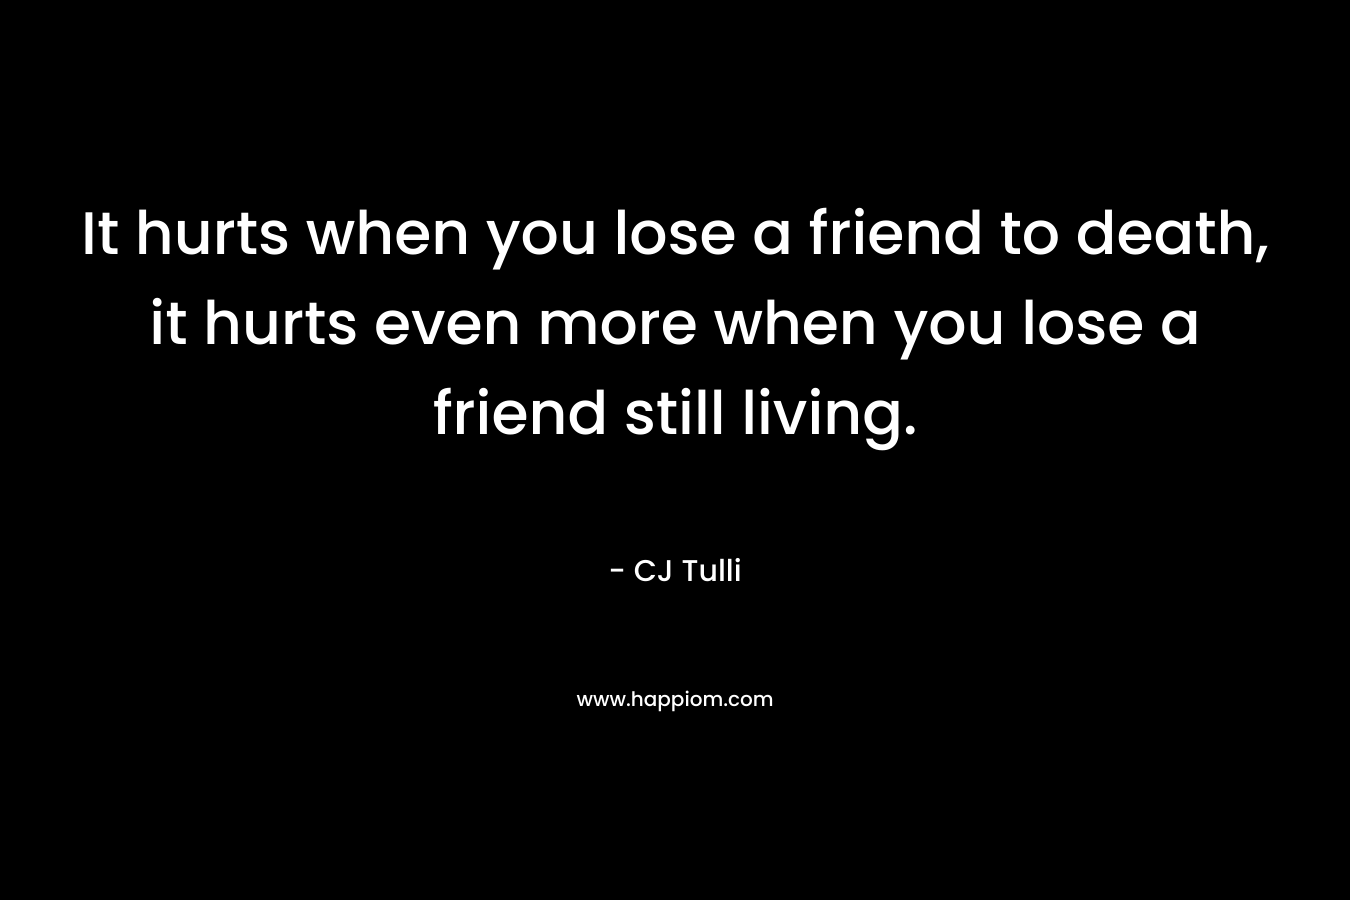 It hurts when you lose a friend to death, it hurts even more when you lose a friend still living.